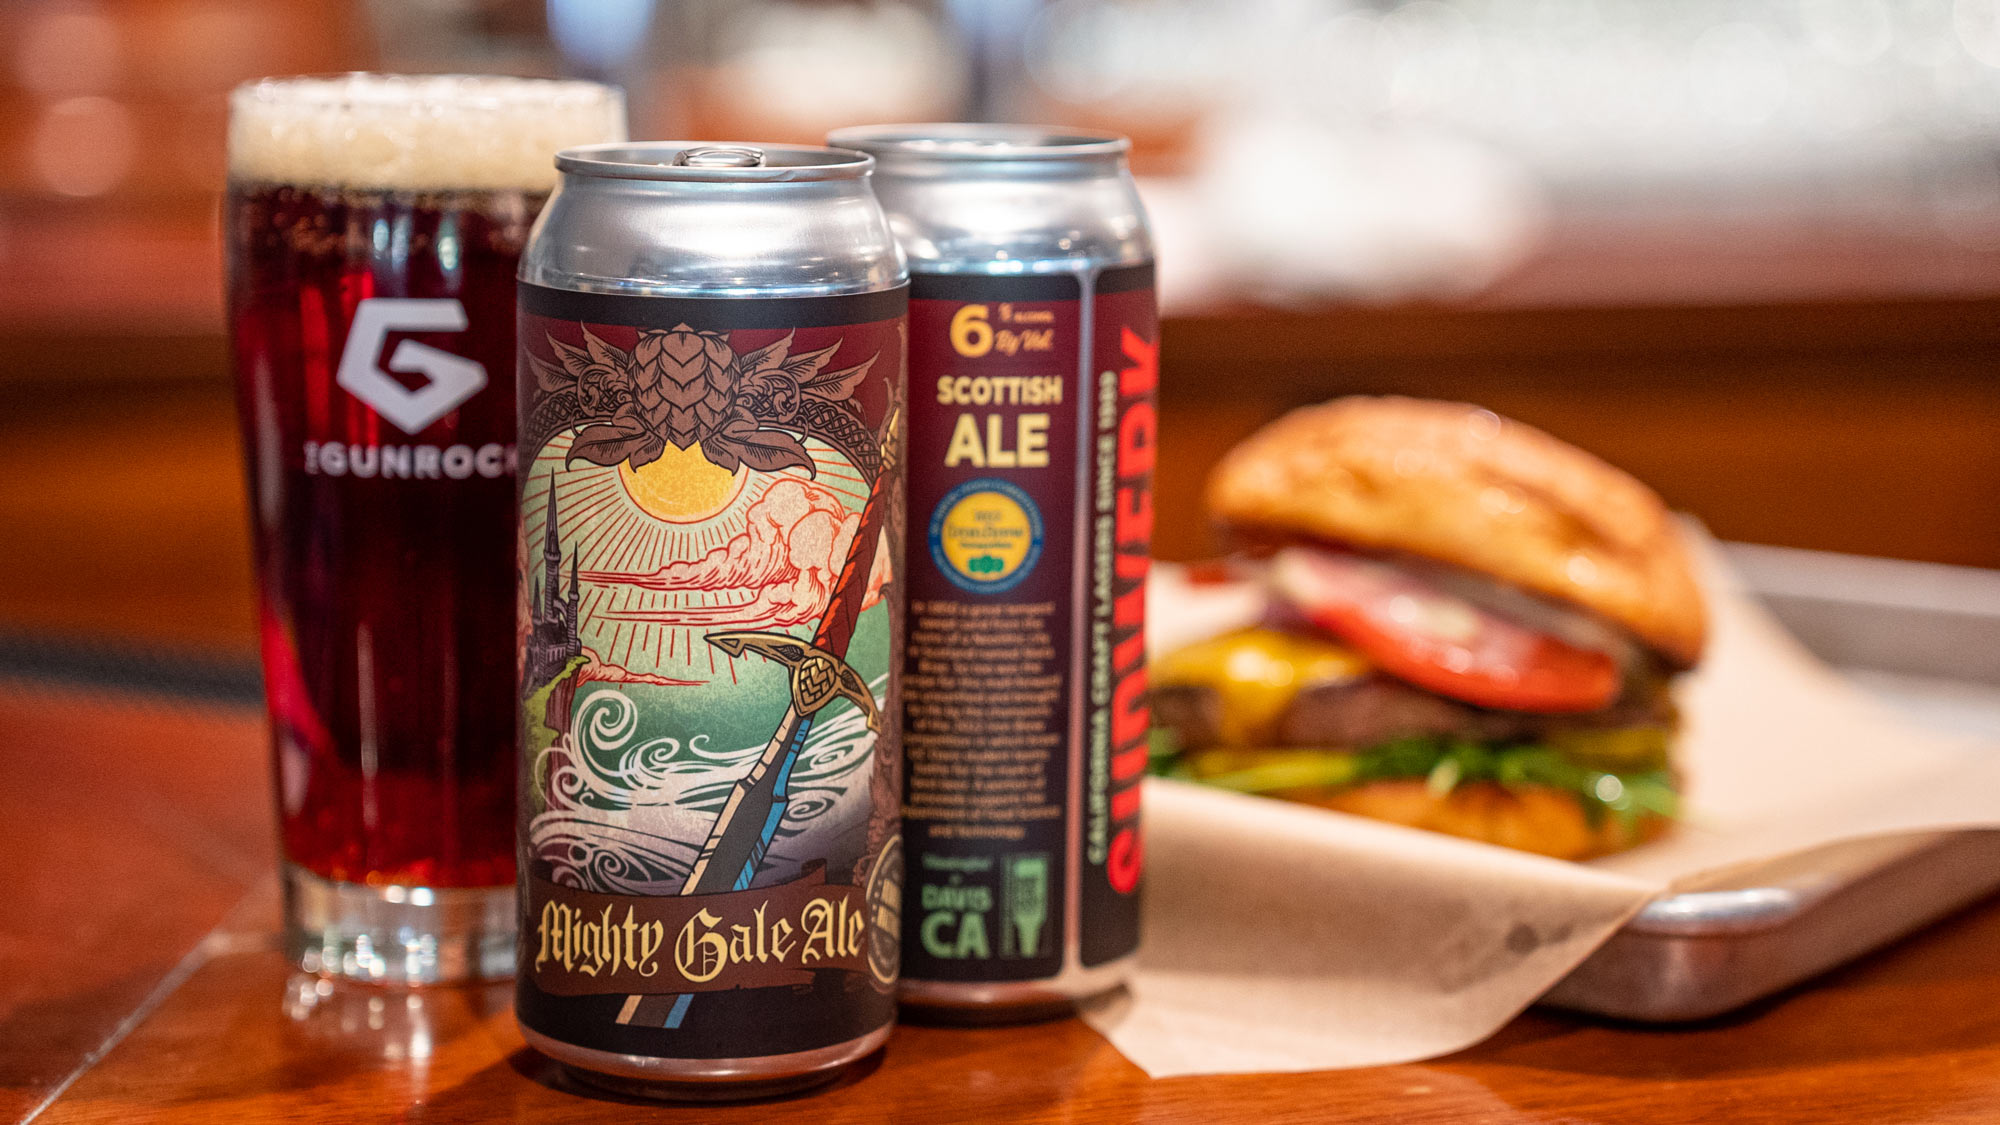 Mighty Gale Ale in can and Gunrock-logo glass, alongside hamburger on a bun